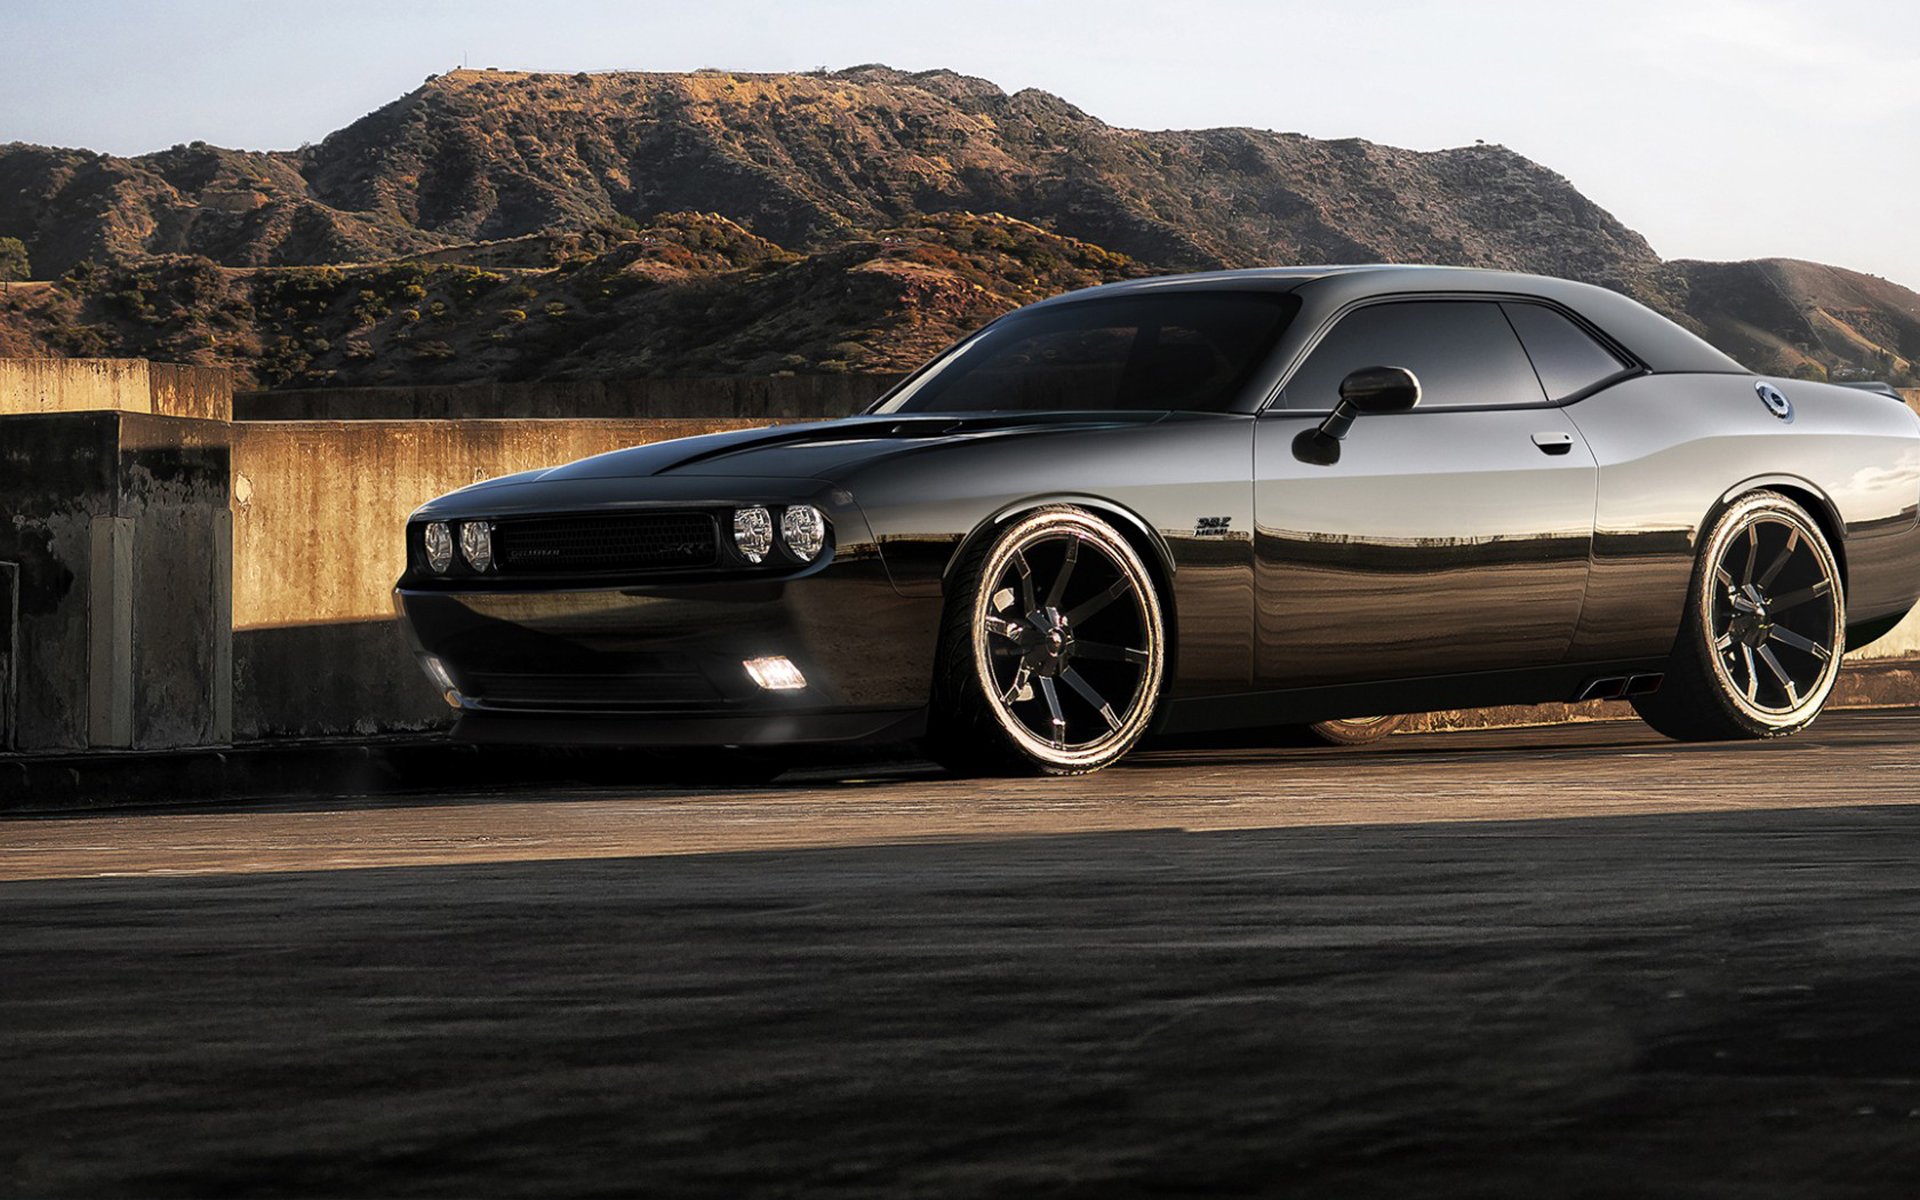 110+ Dodge Charger HD Wallpapers and Backgrounds